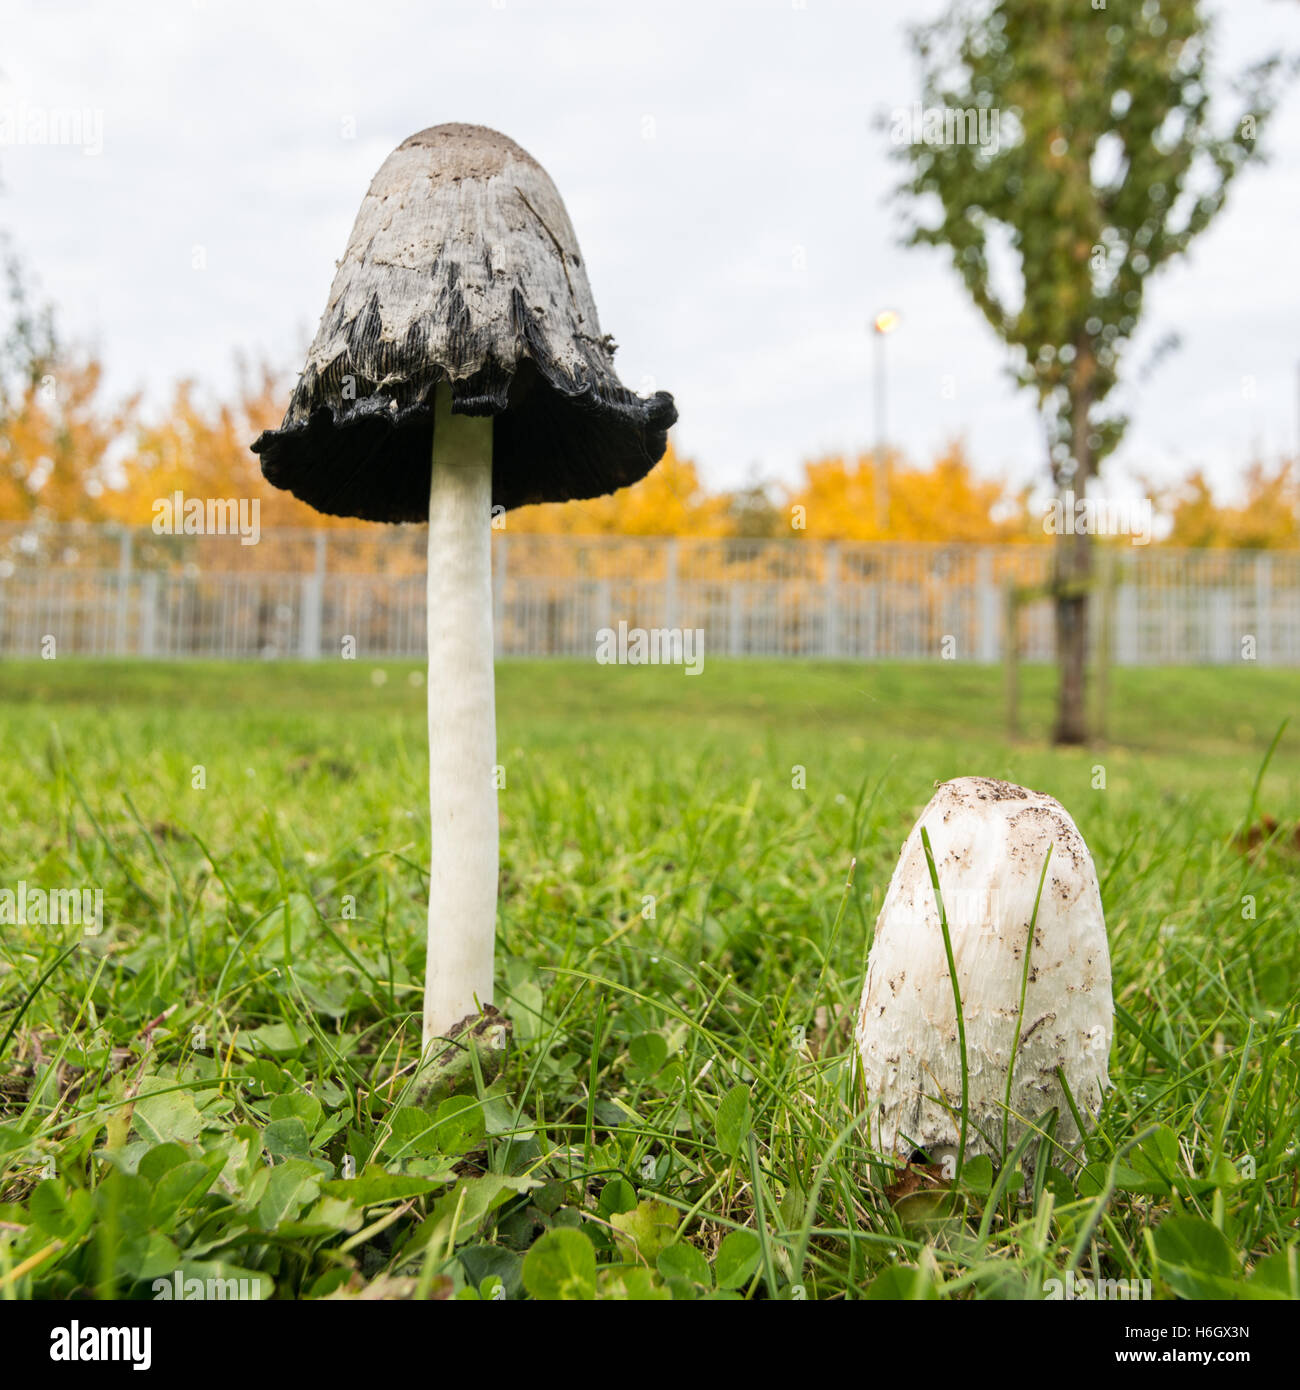 Shaggy Ink Cap mushrooms are a common site in gardens and parks in late summer and early autumn in the UK. Stock Photo